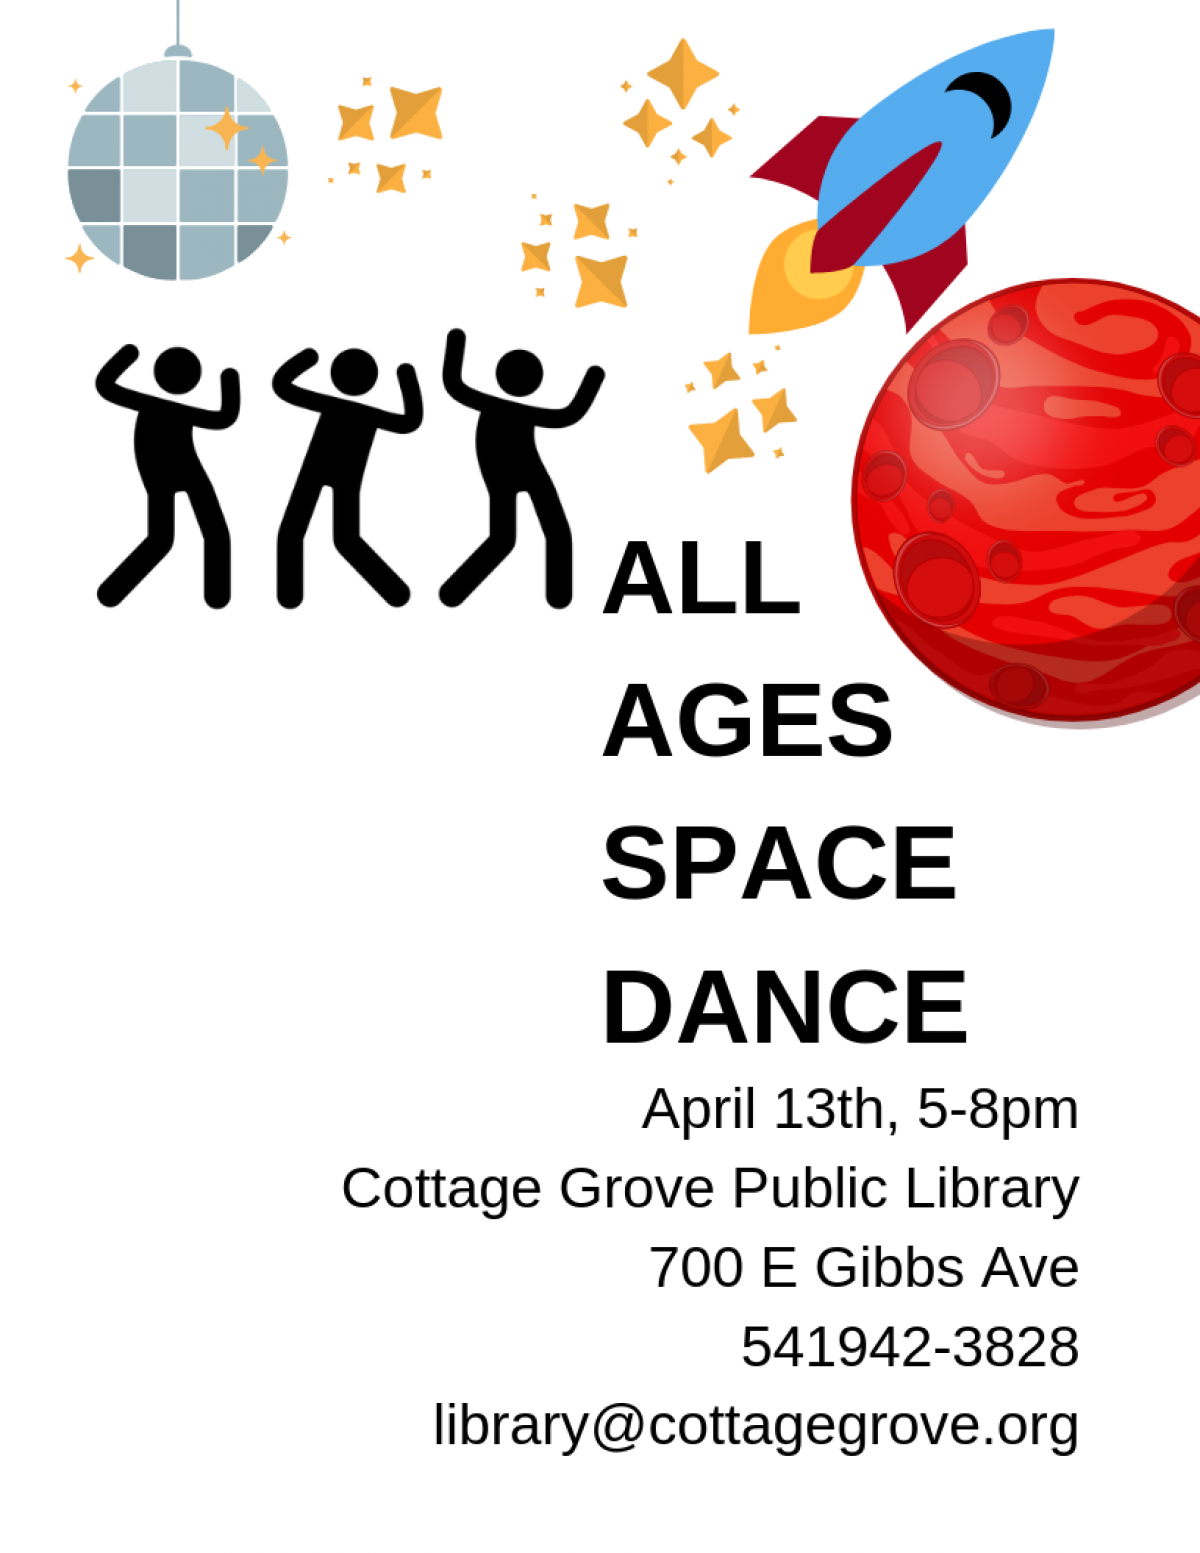 all ages space dance: April 13th, 5-8pm